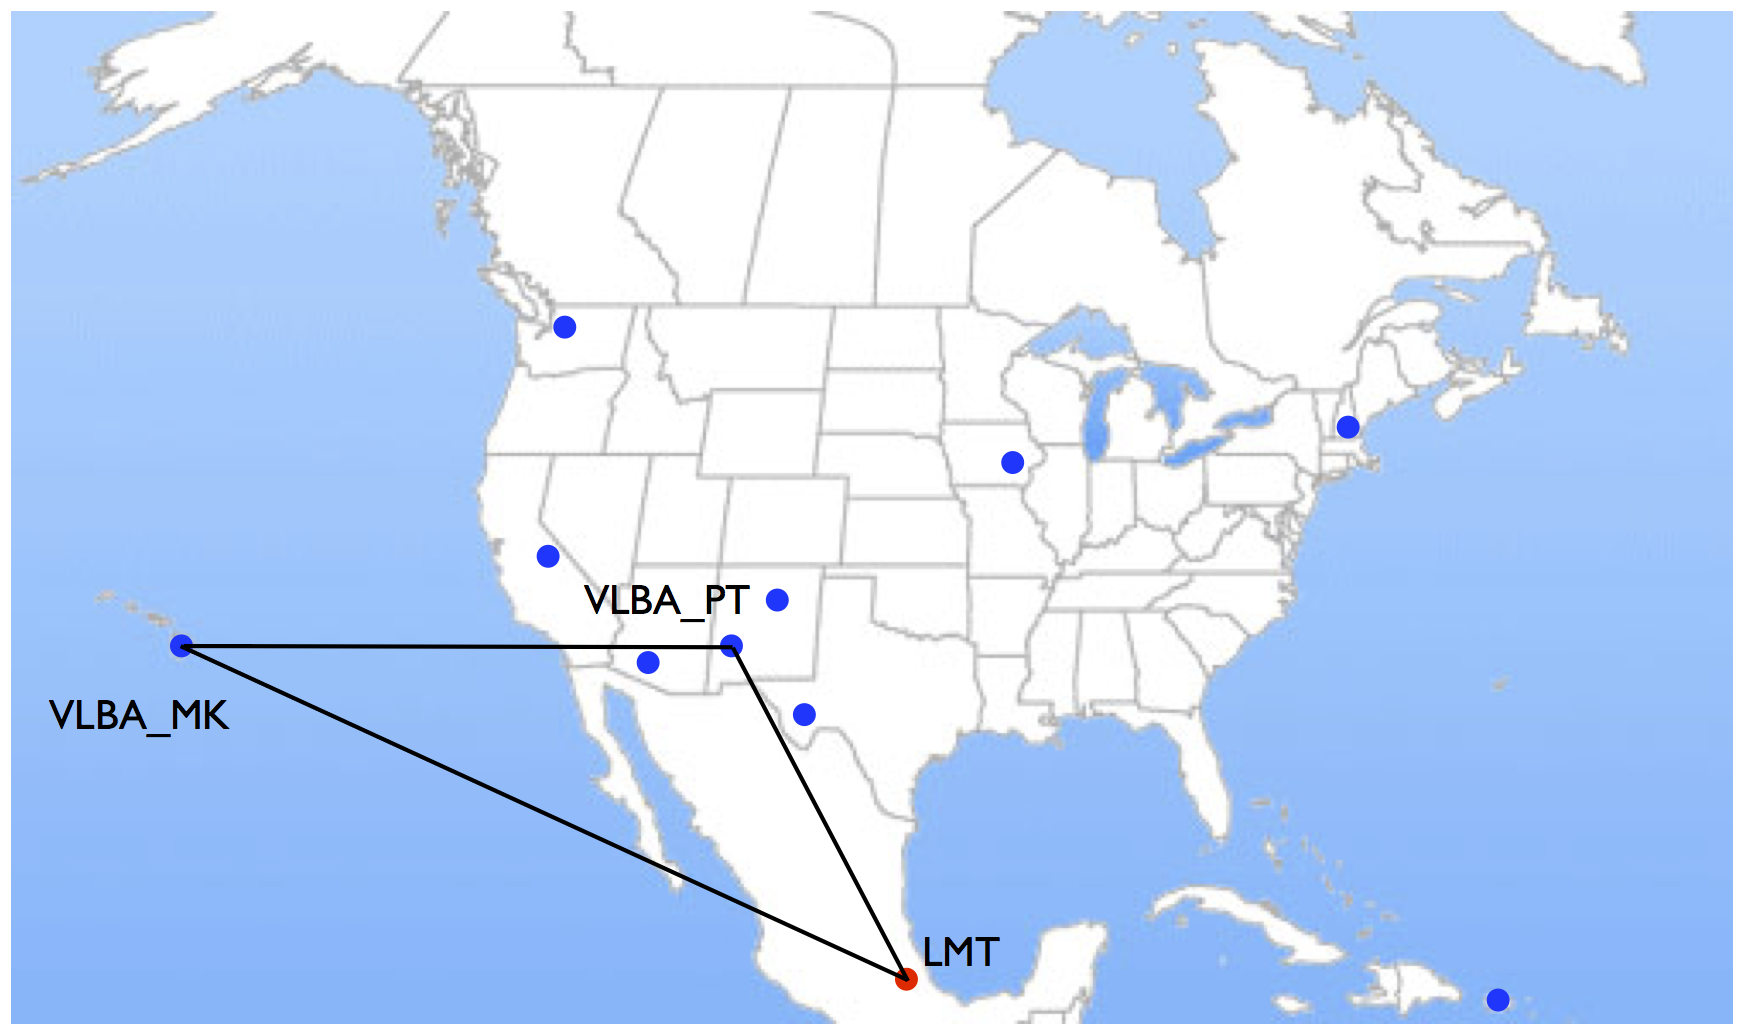 VLBA and LMT map